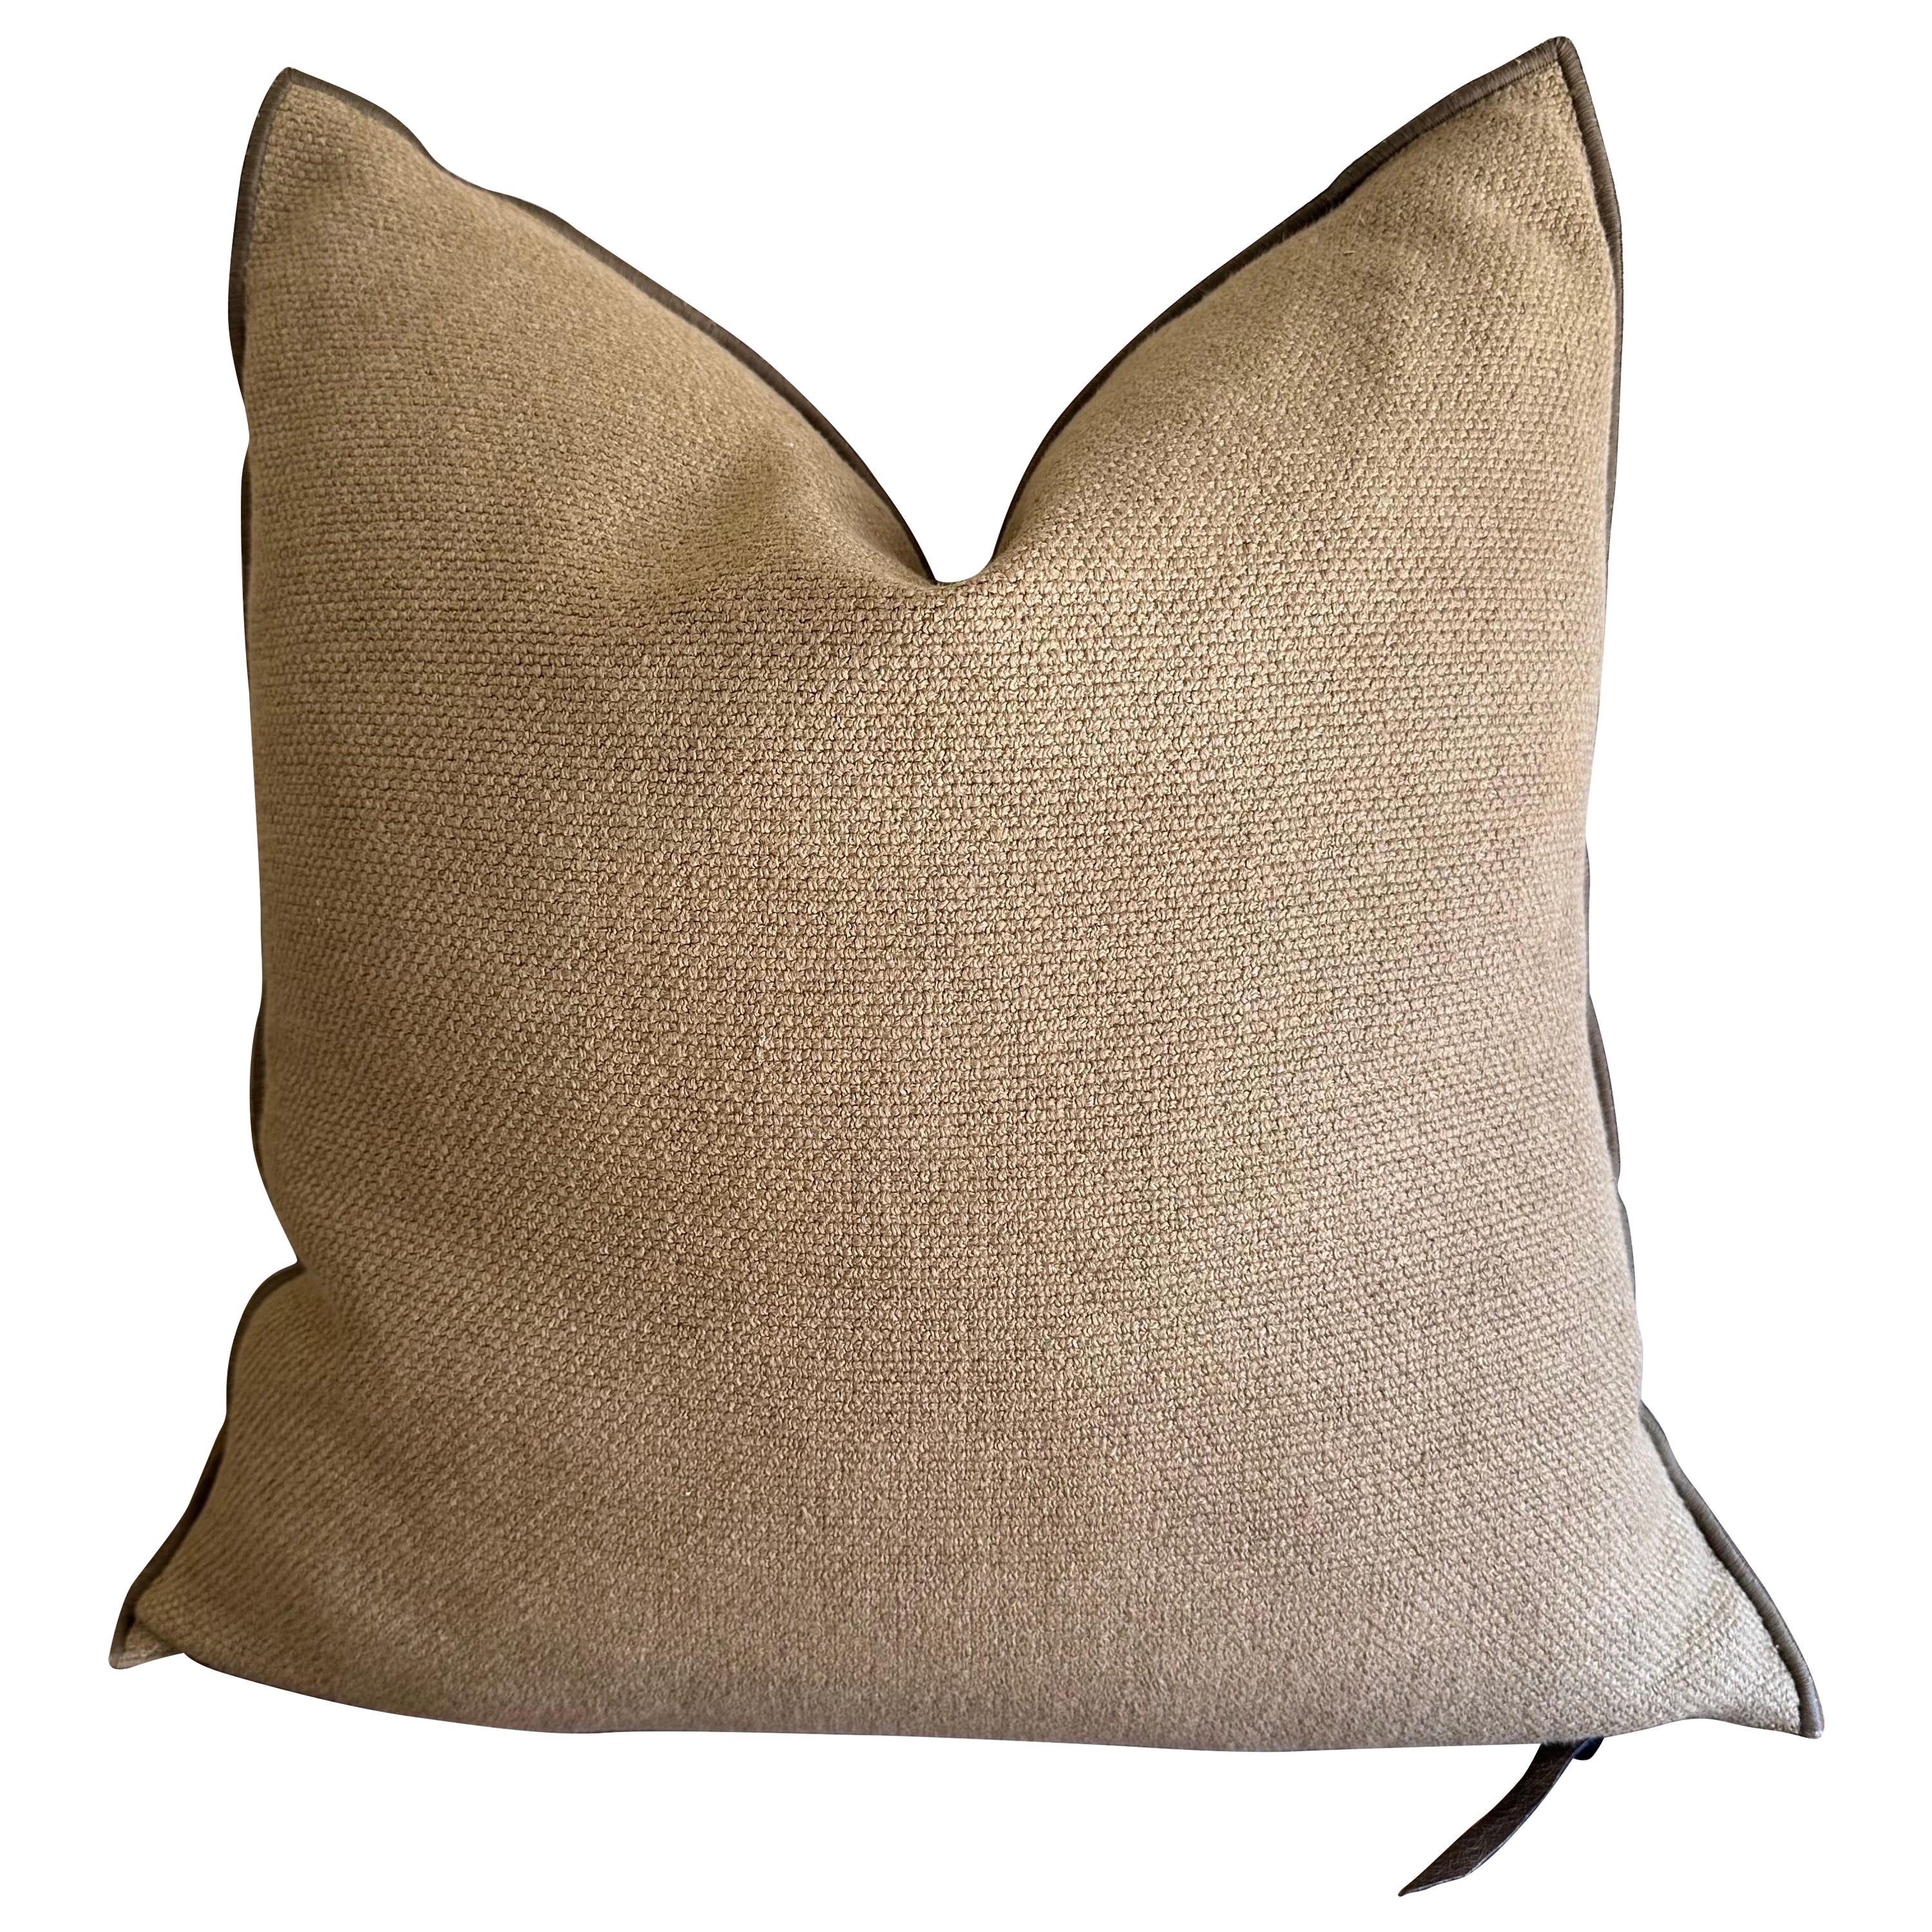 Fromentera French Linen Accent Pillow in Cappucino